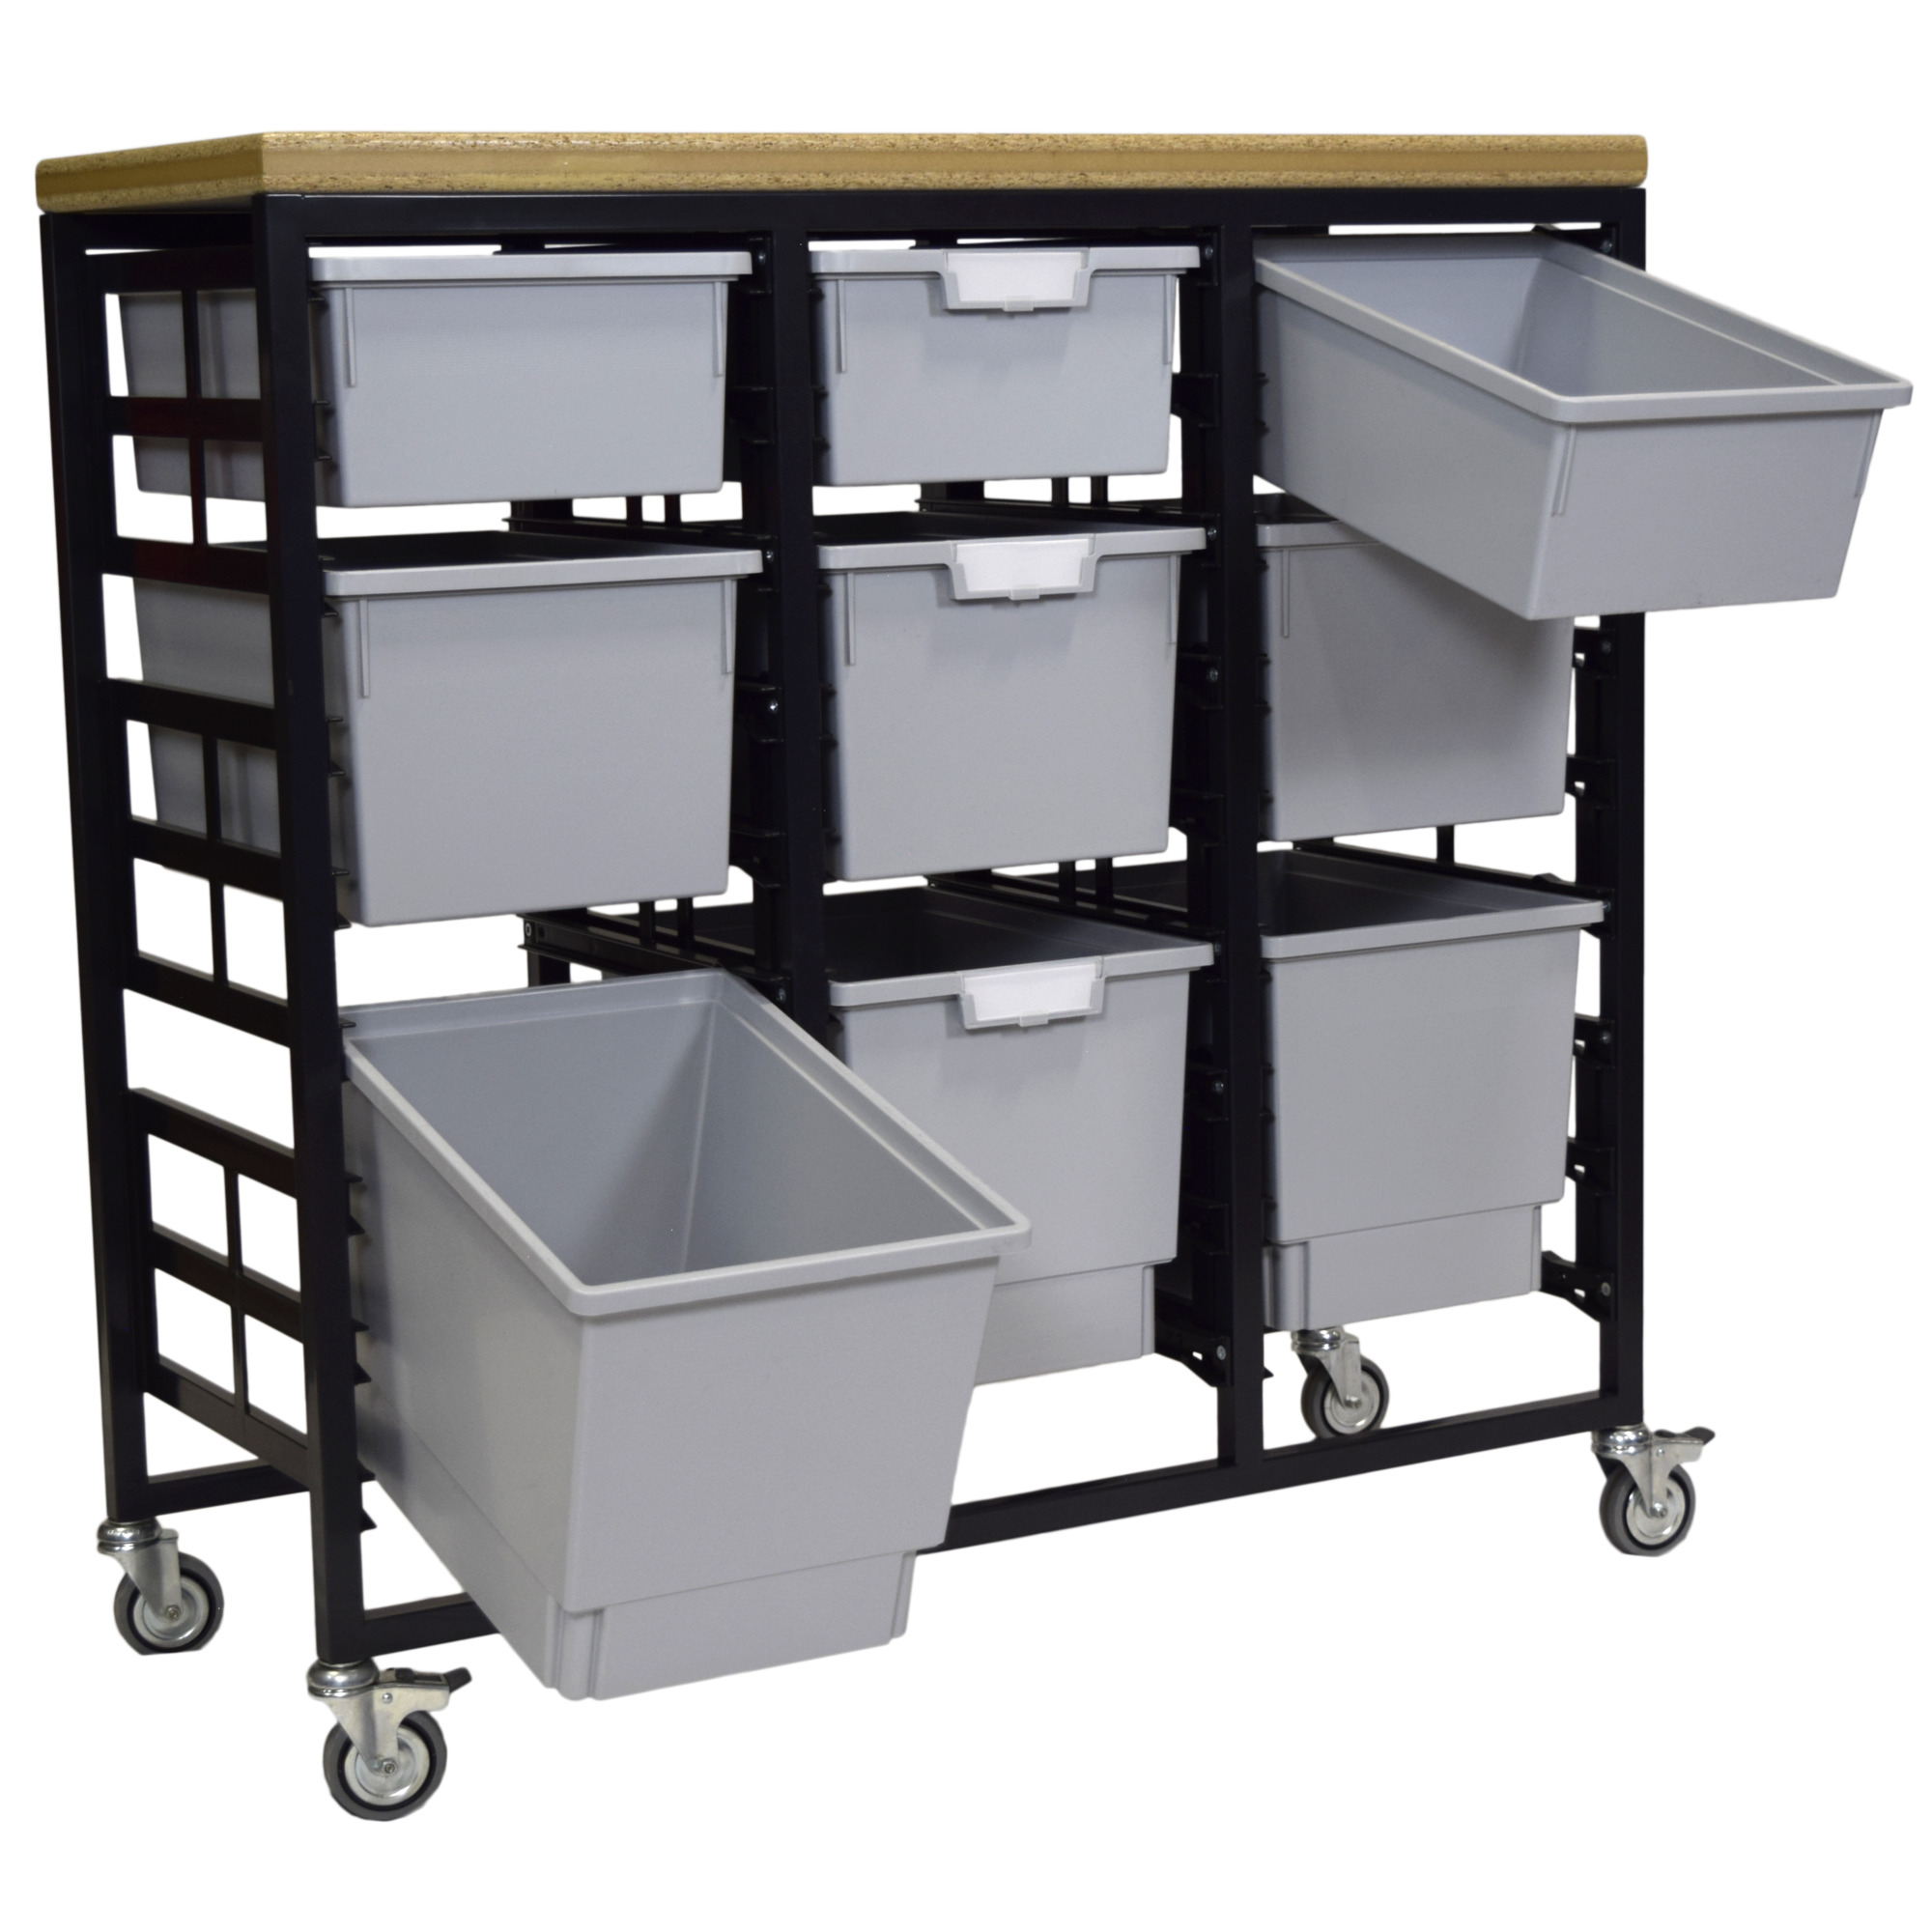 Certwood StorWerks, Mobile Work Station w/Wood Top -9 Trays-Gray, Included (qty.) 9, Material Plastic, Height 12 in, Model CE2103DGGC-3D3T3QLG